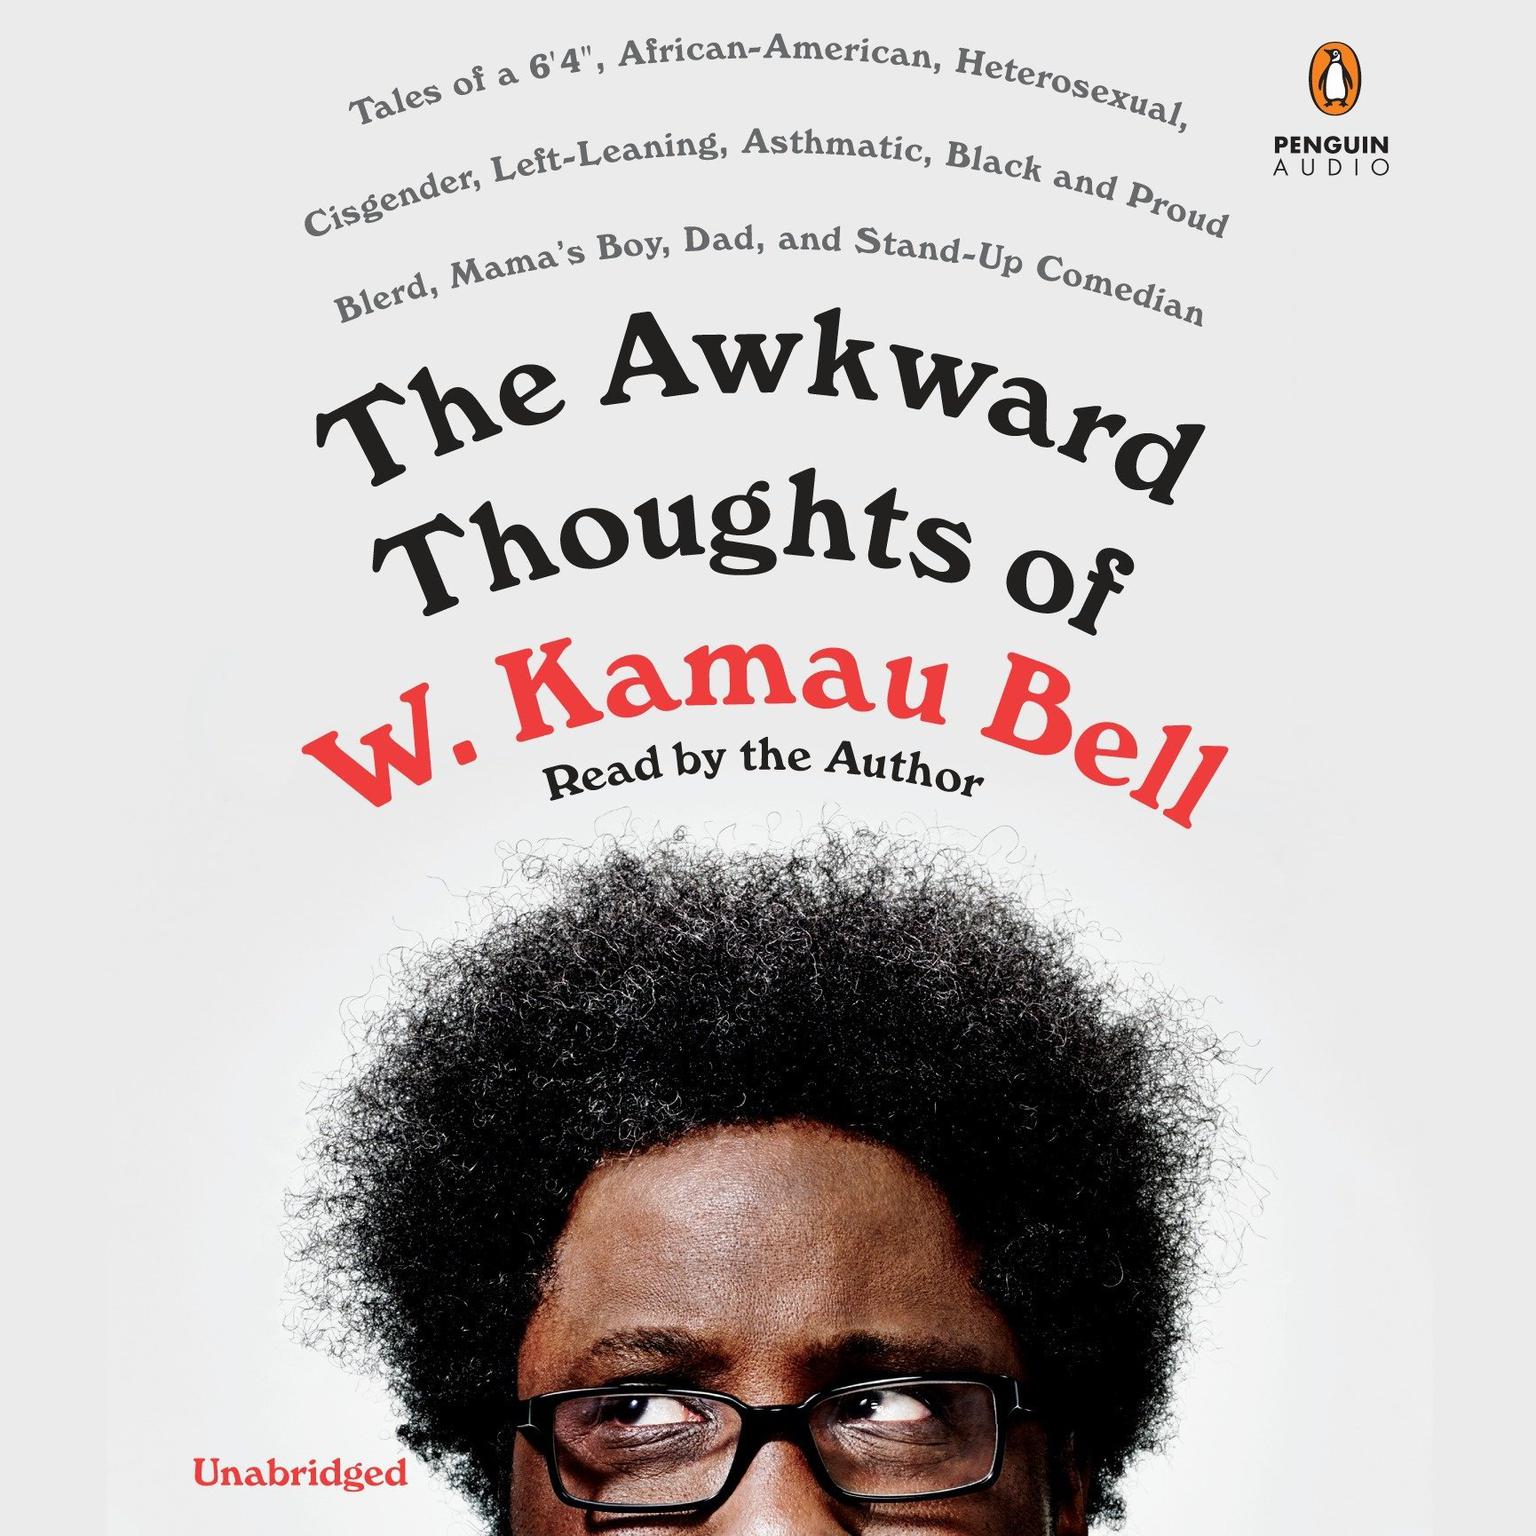 The Awkward Thoughts of W. Kamau Bell: Tales of a 6 4, African American, Heterosexual, Cisgender, Left-Leaning, Asthmatic, Black and Proud Blerd, Mamas Boy, Dad, and Stand-Up Comedian Audiobook, by W. Kamau Bell